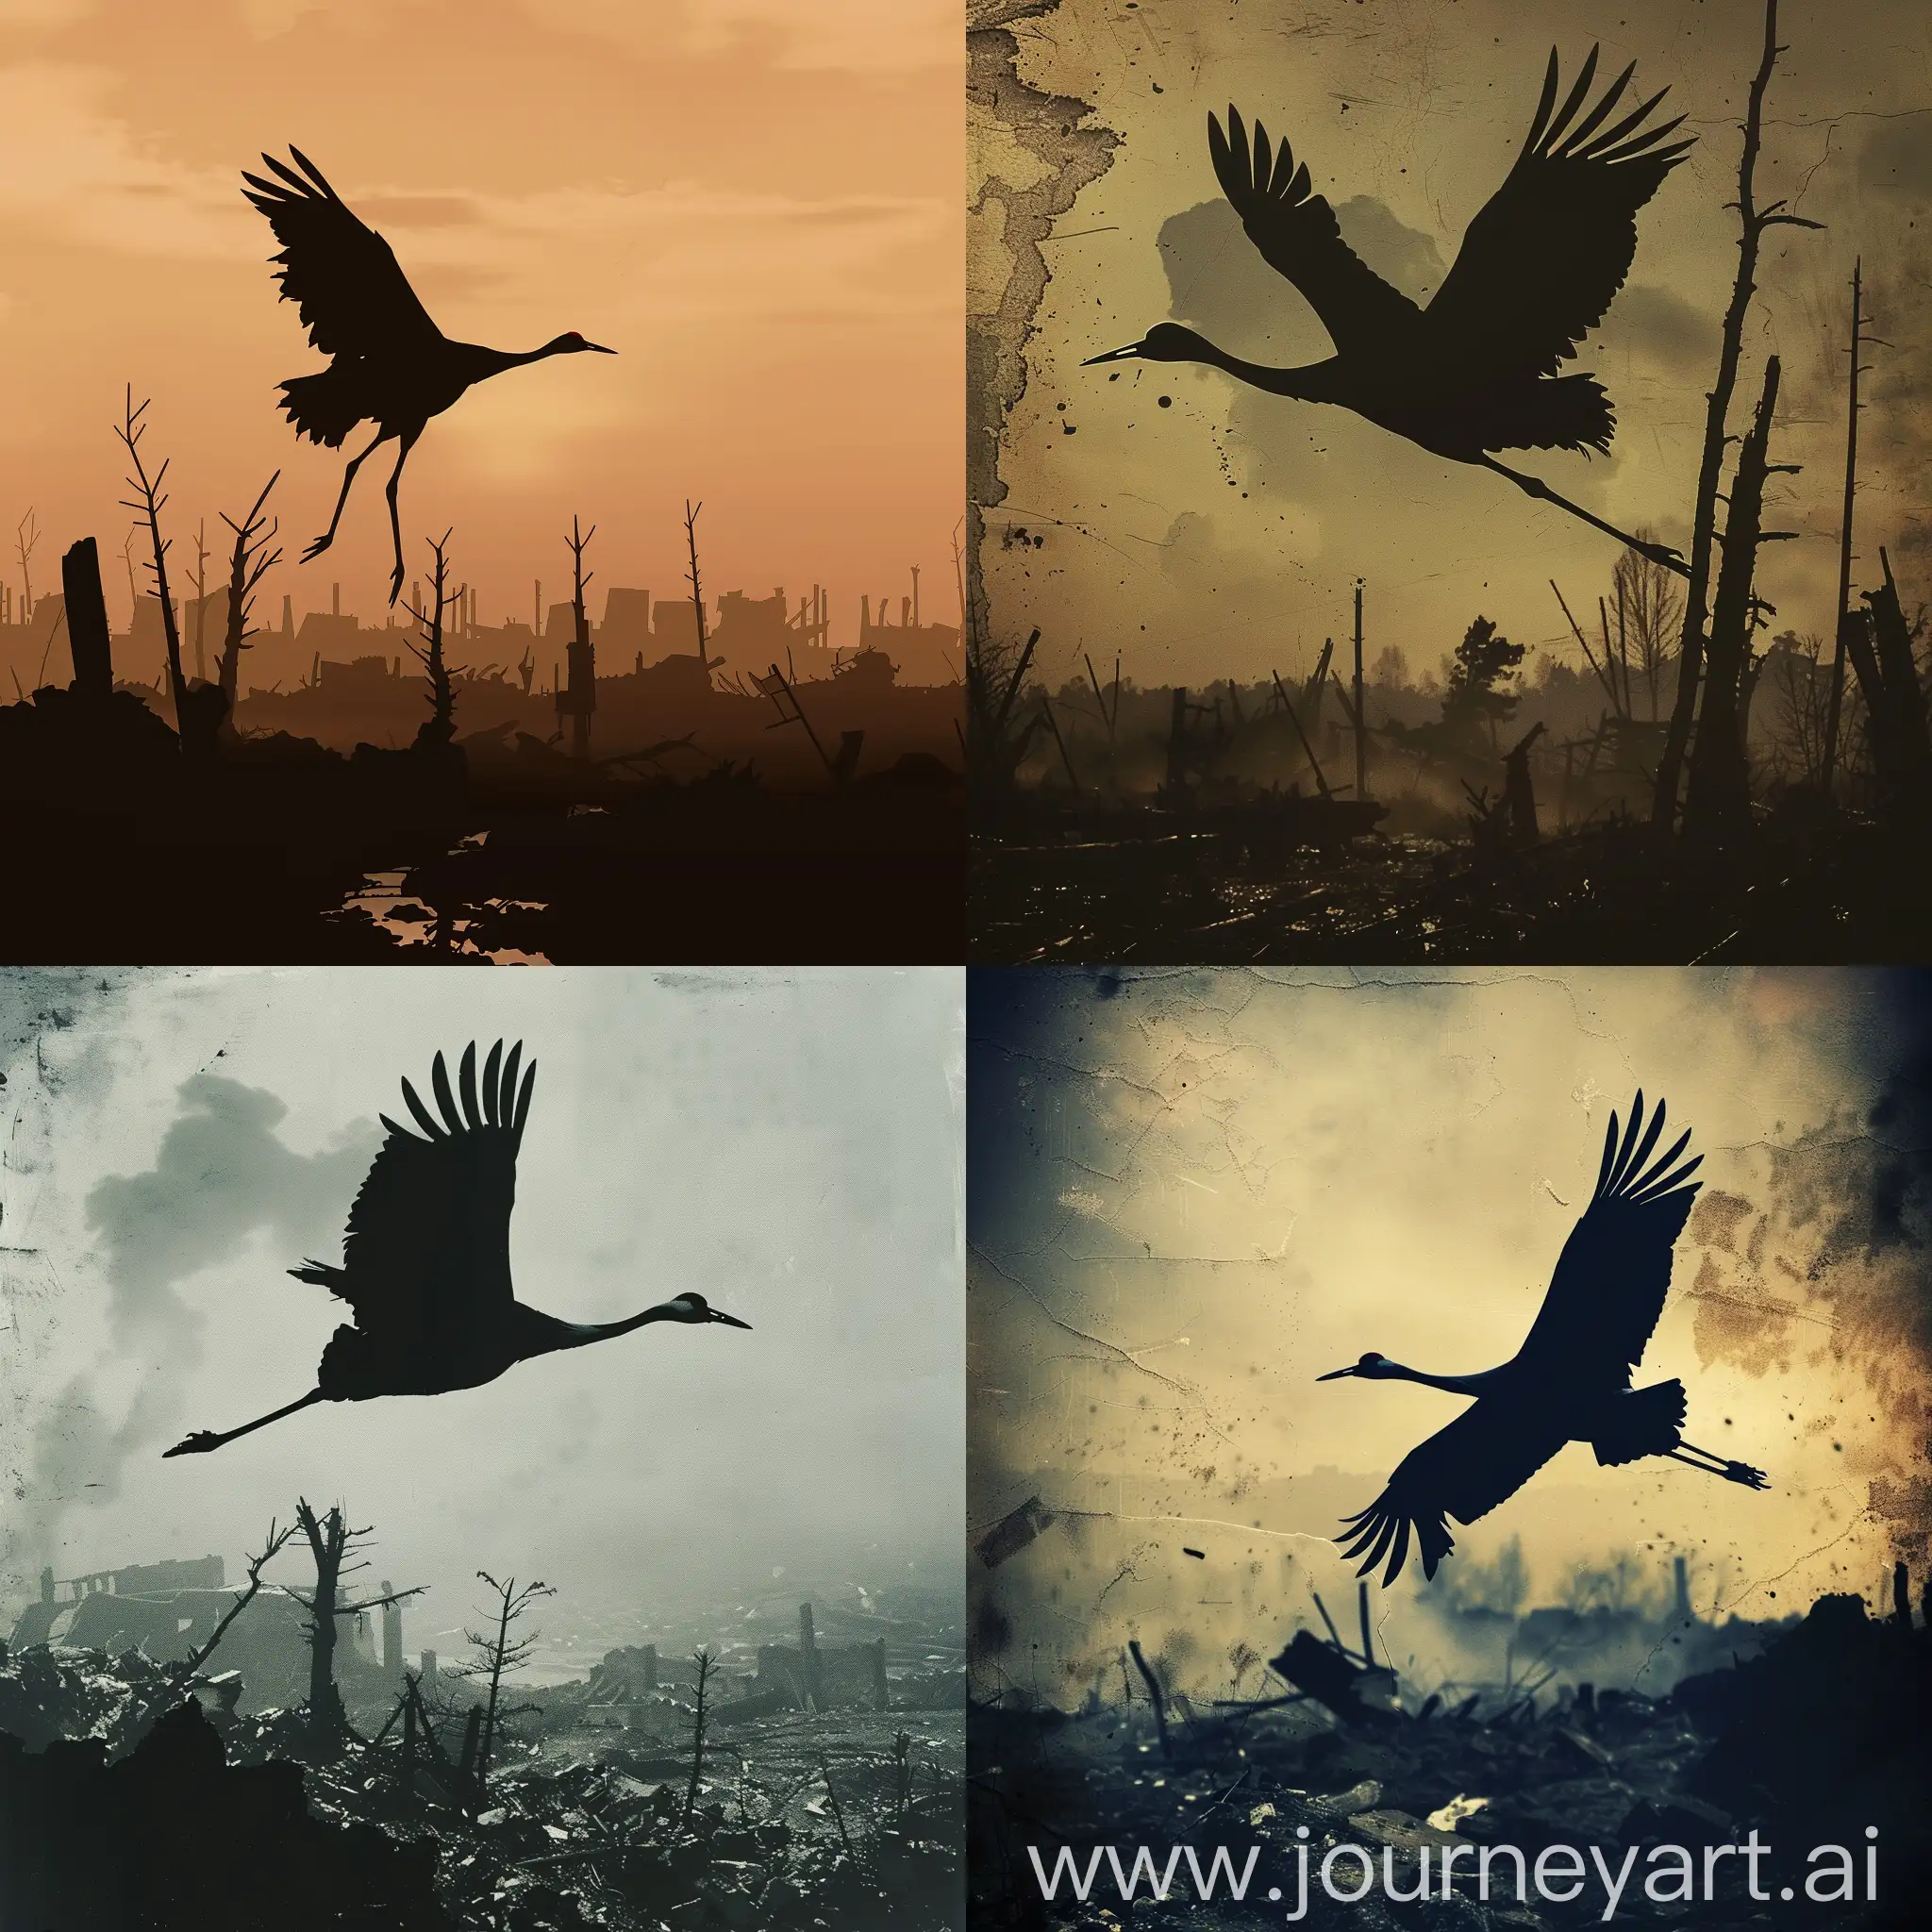 The silhouette of a crane flying against the backdrop of a war-torn landscape, symbolizing the enduring spirit of those who fought in the Great Patriotic War.